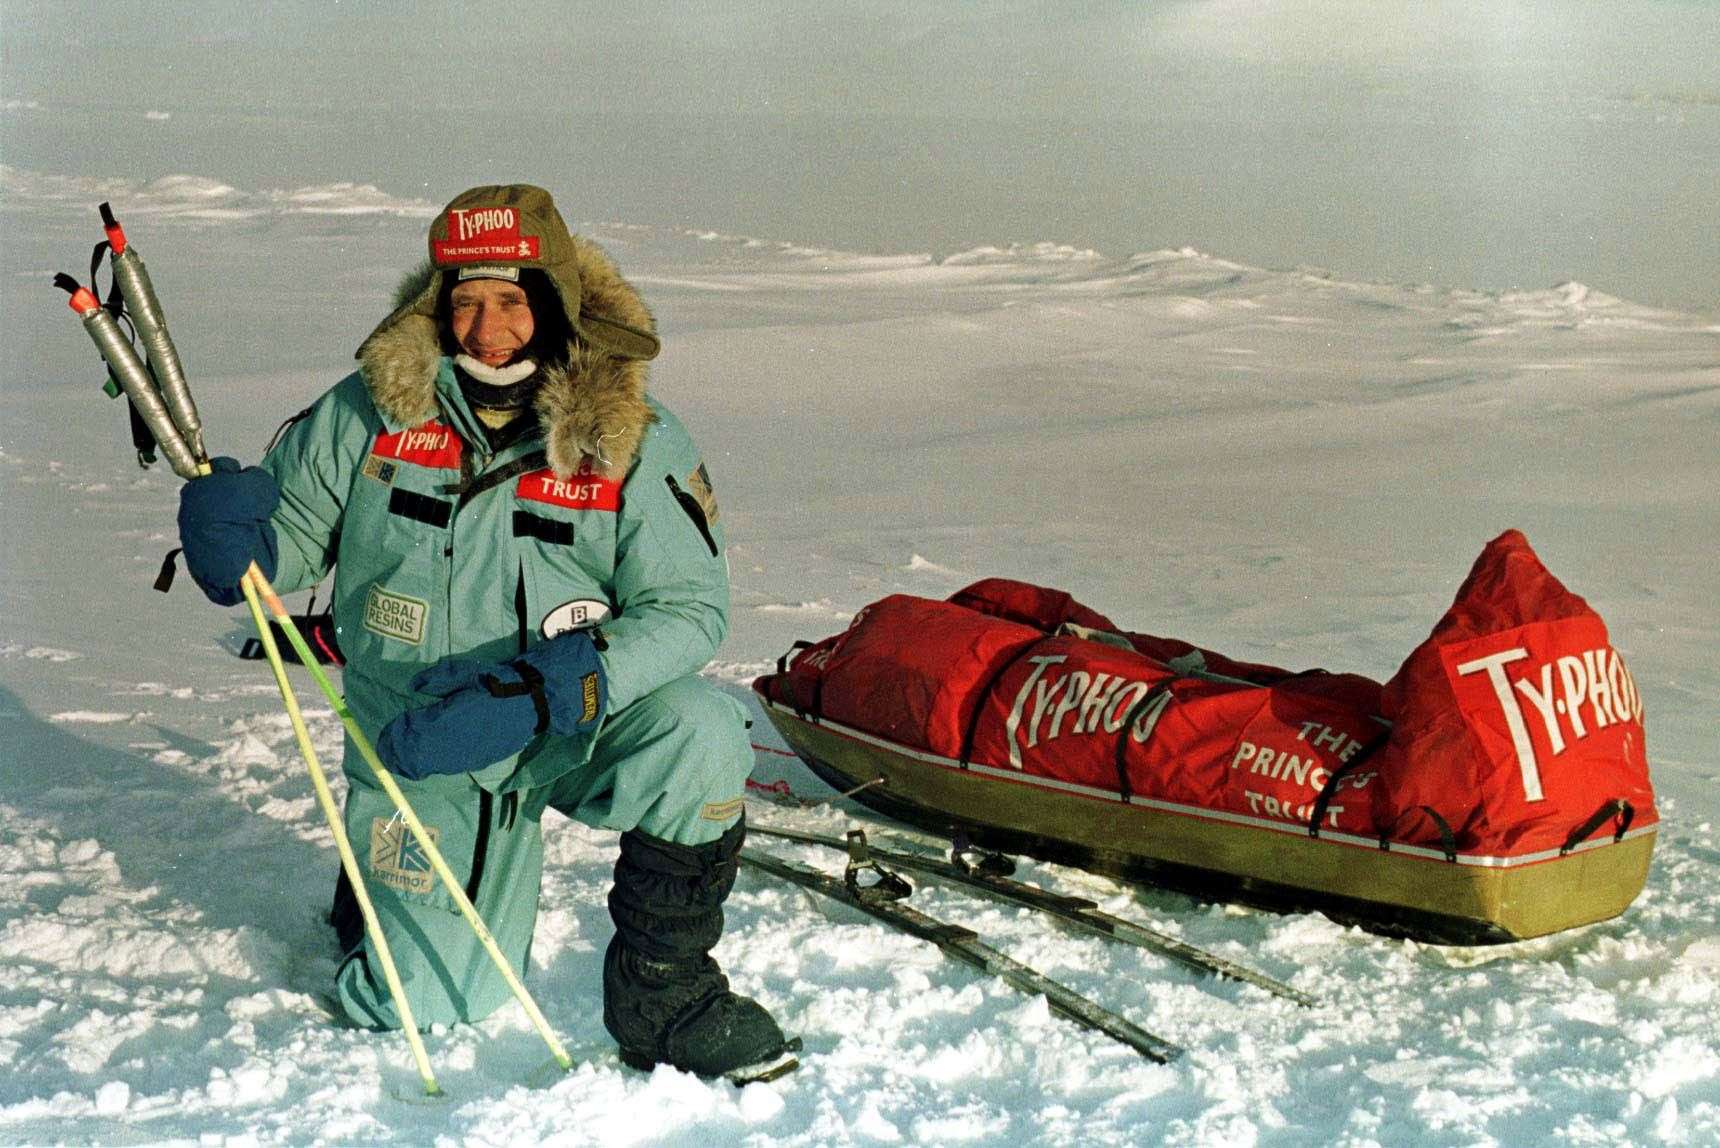 Sir David at Resolute Bay in the Arctic on the eve of his attempt of the first solo and unsupported expedition of the North Geomagnetic Pole in 1999 (PA)